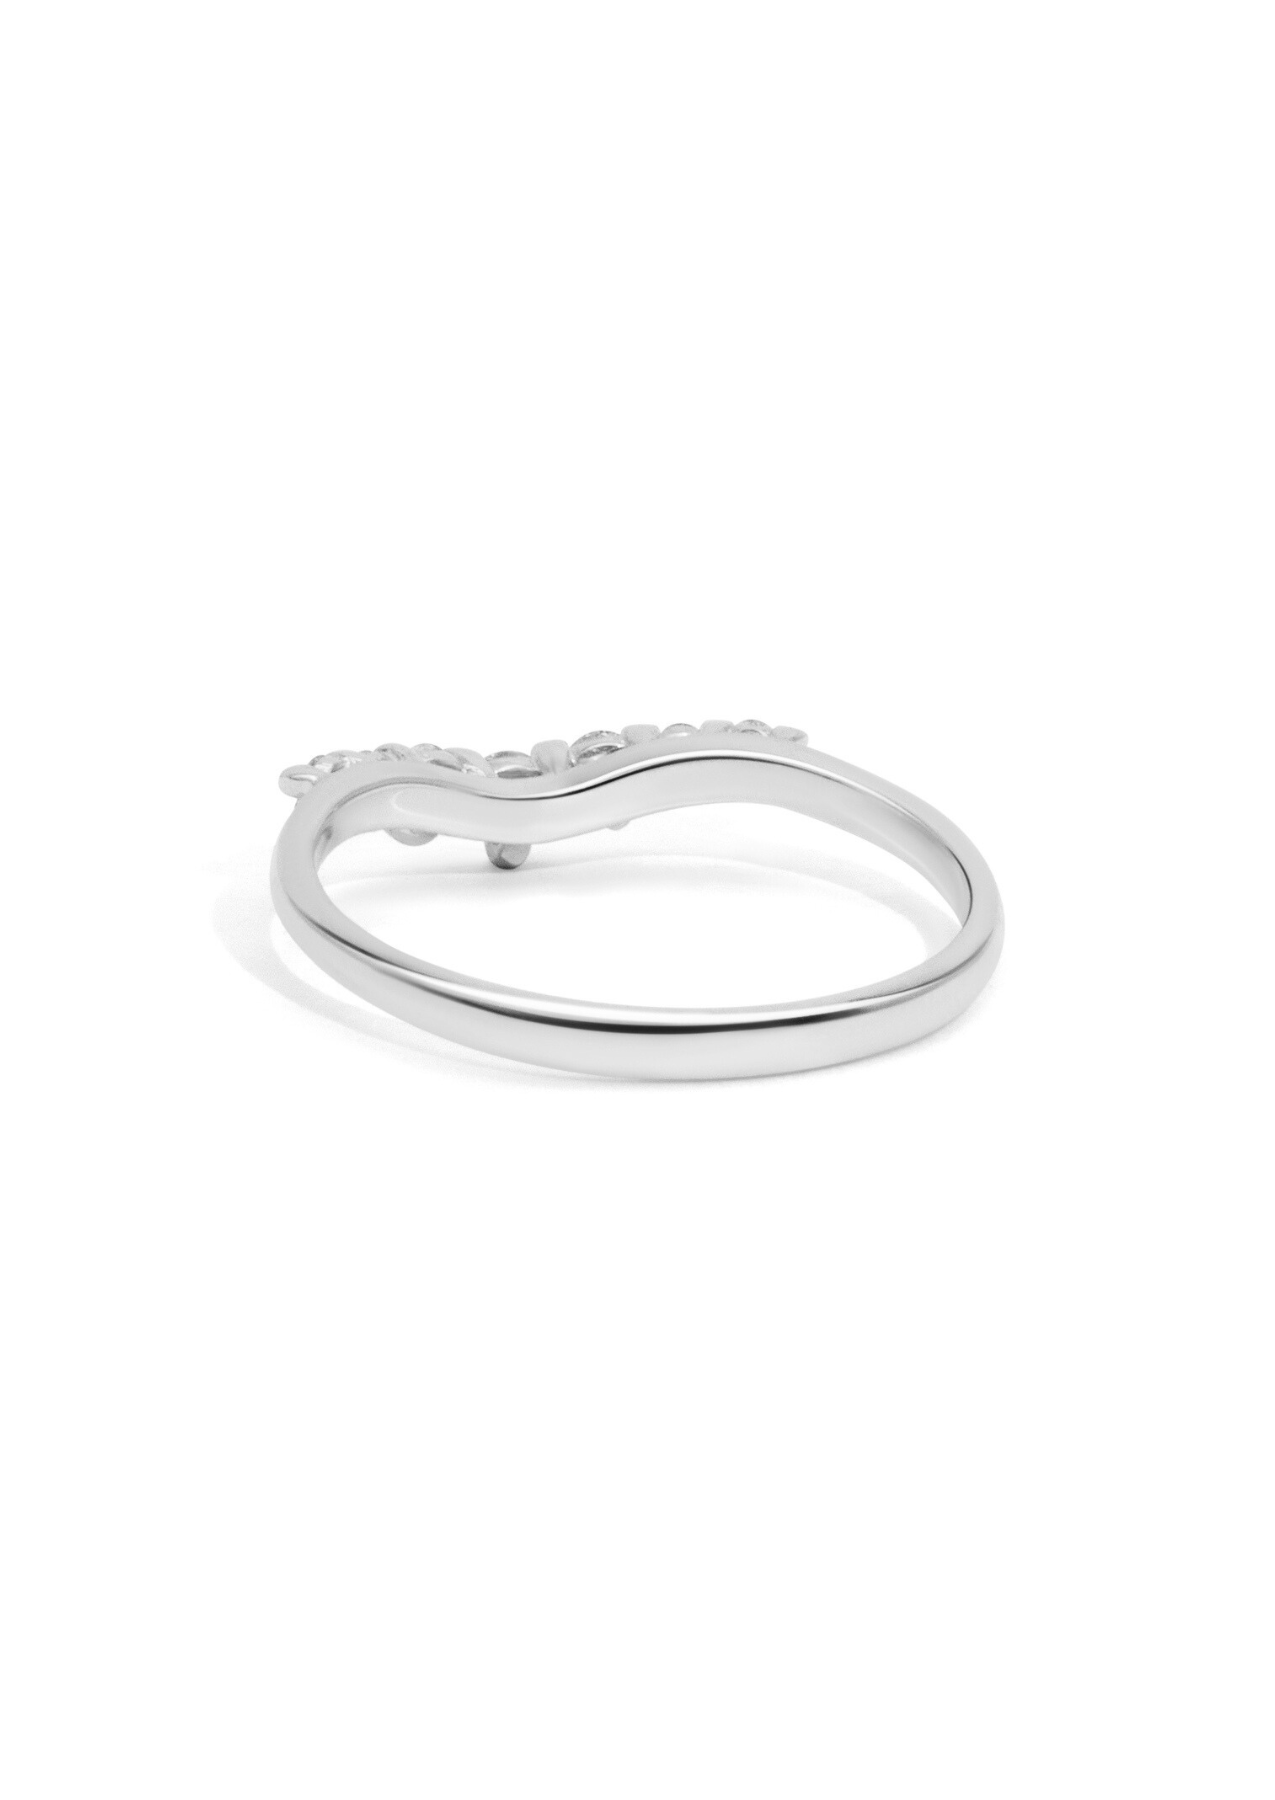 The Petal Diamond Curved White Gold Band